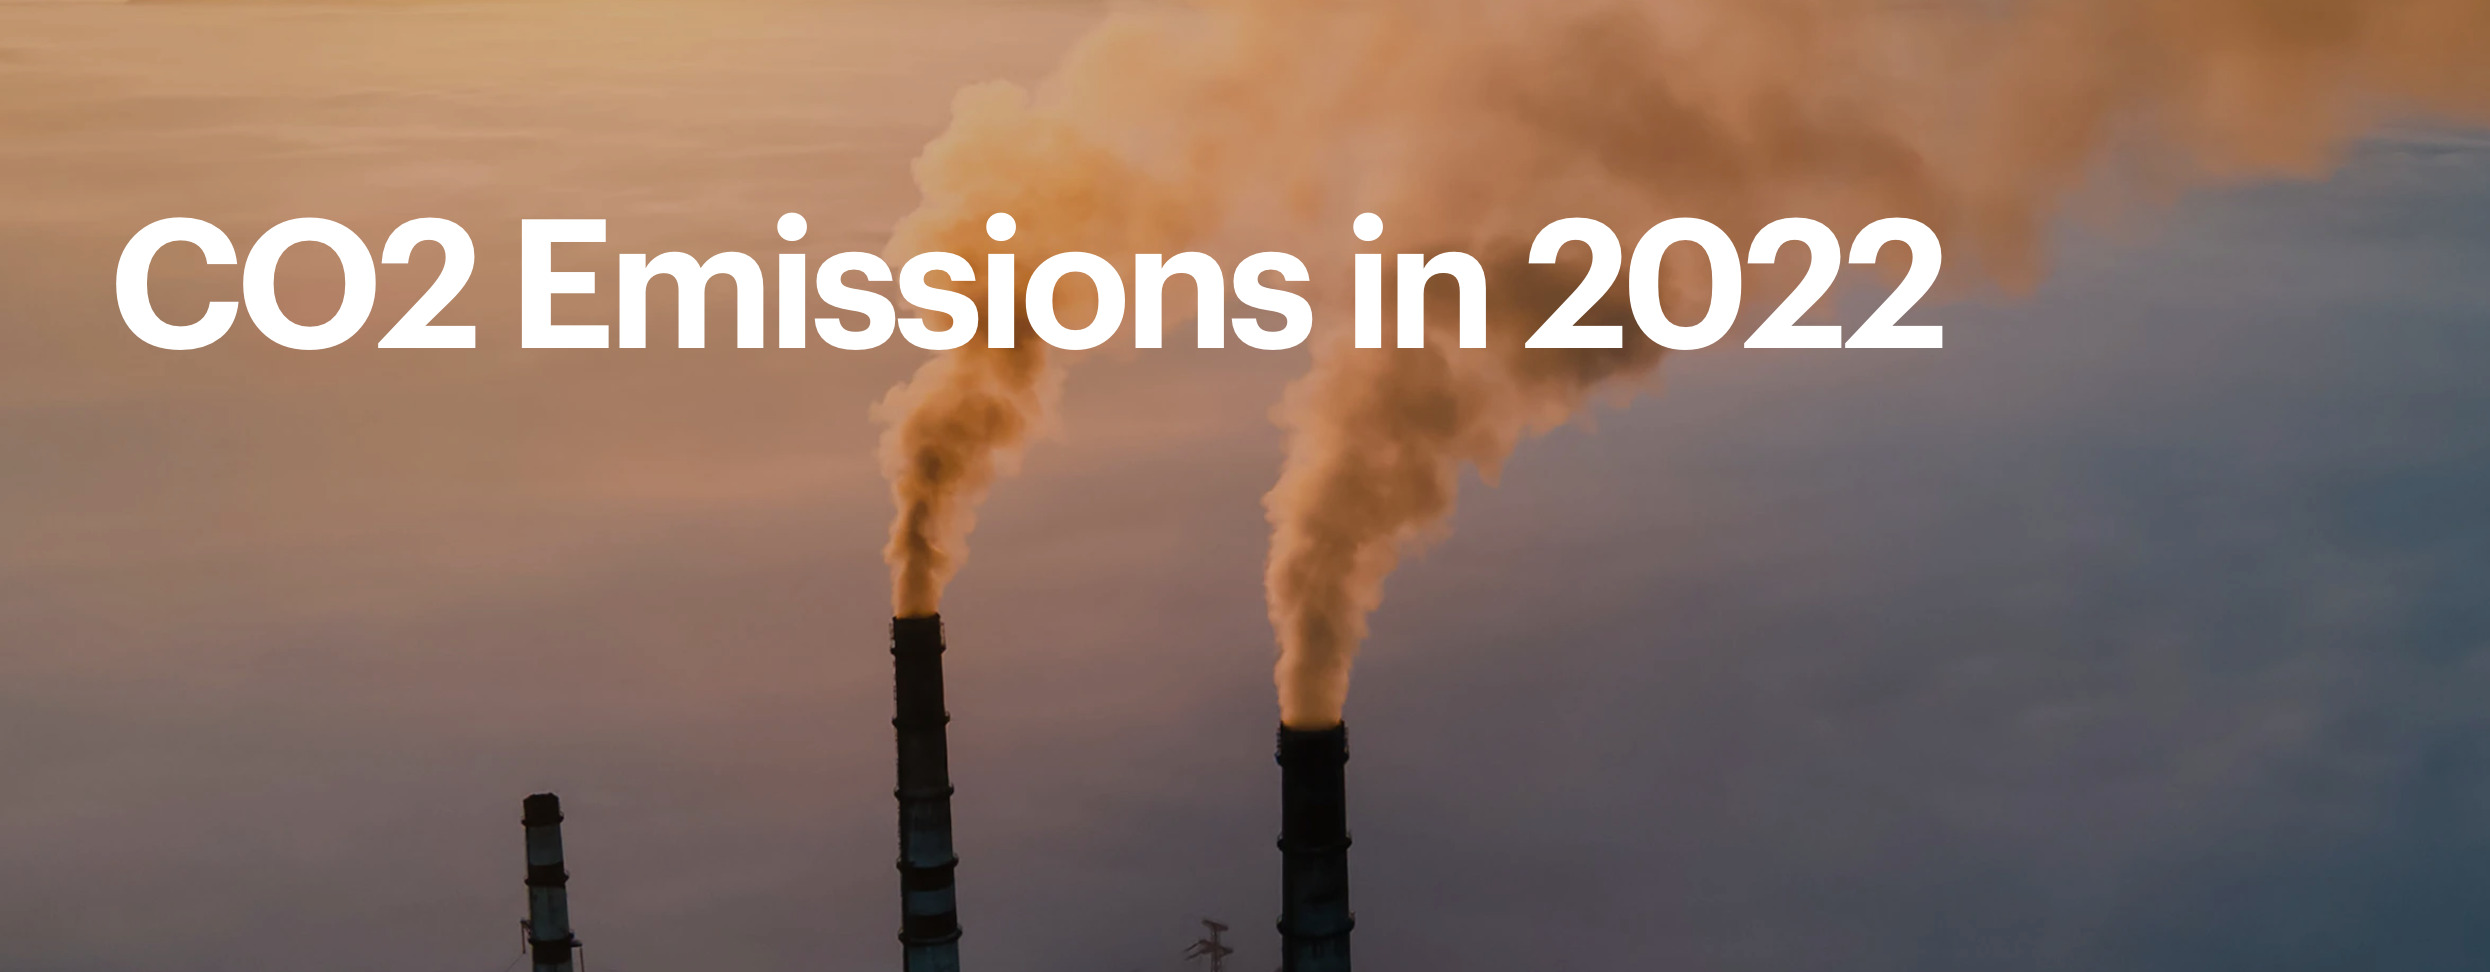 CO2 Emissions in 2022